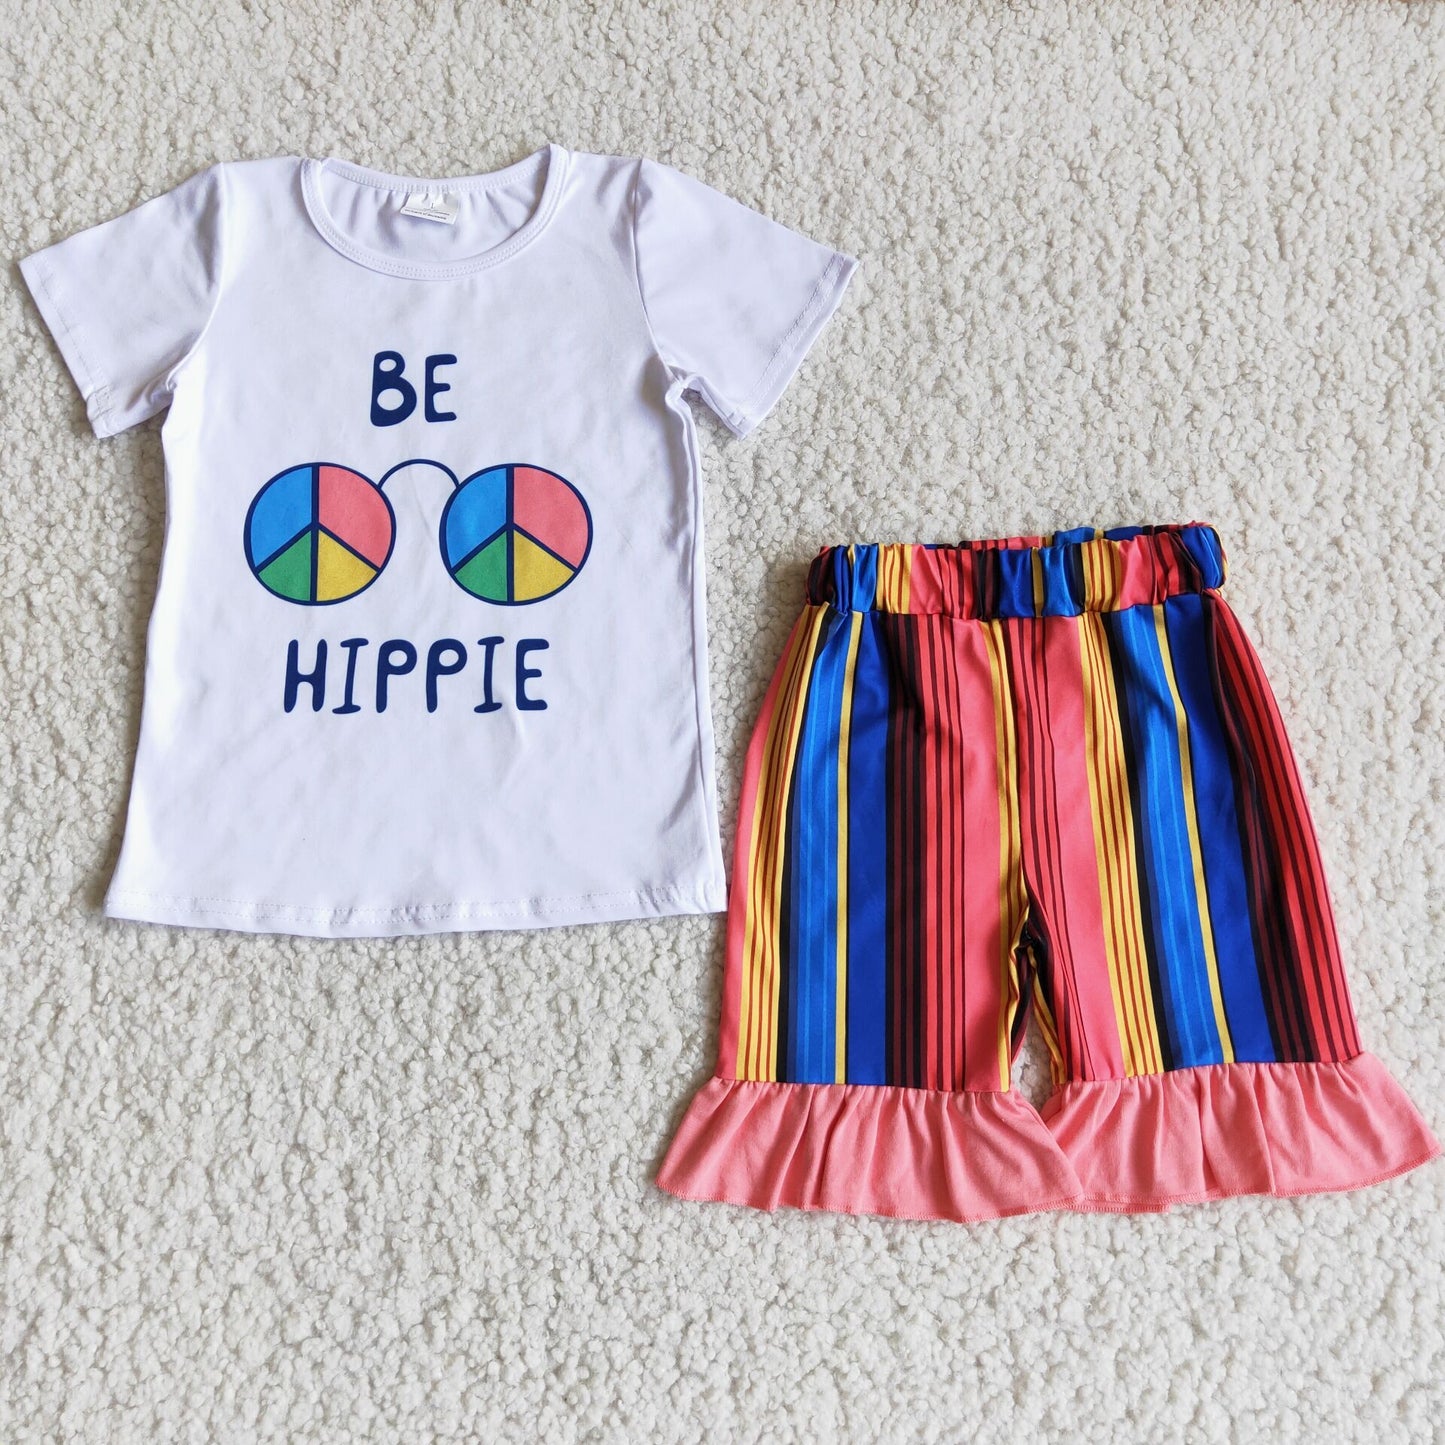 Be Hippie white shirt colorful stripe shorts girls summer clothes